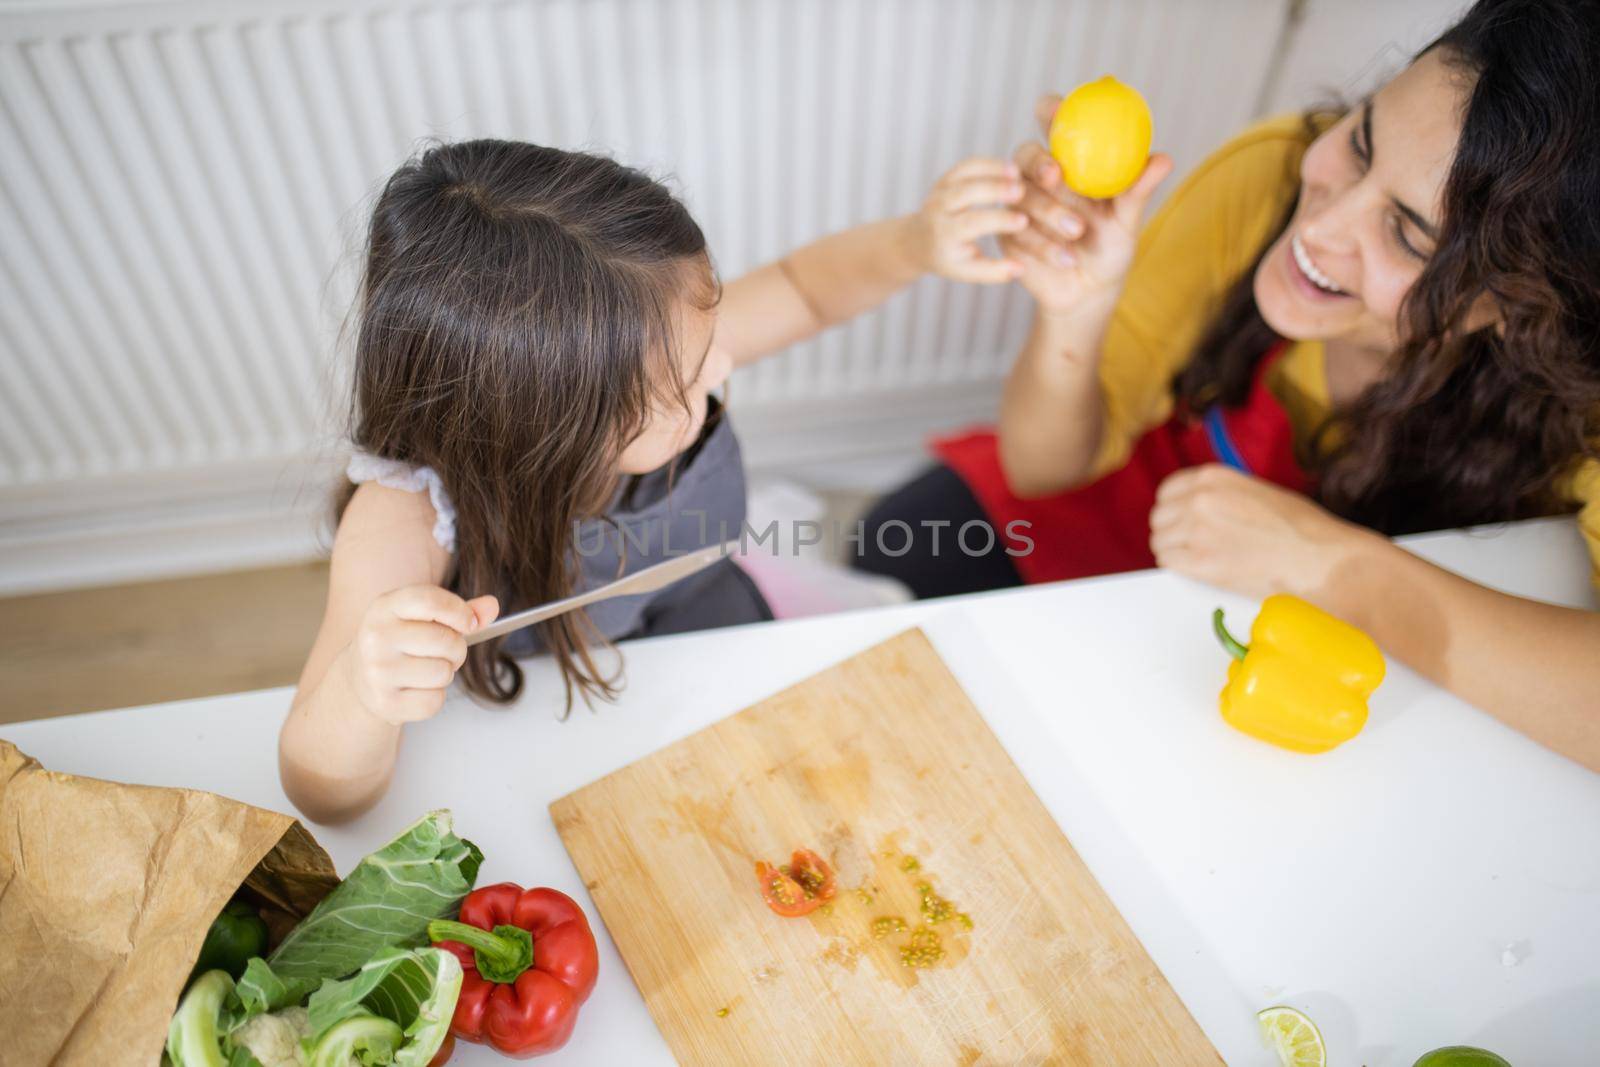 Happy little girl and her mother slicing lemons and tomatoes on cutting board. Smiling woman and young child at white talbe holding lemons. Daughter-mother cooking together